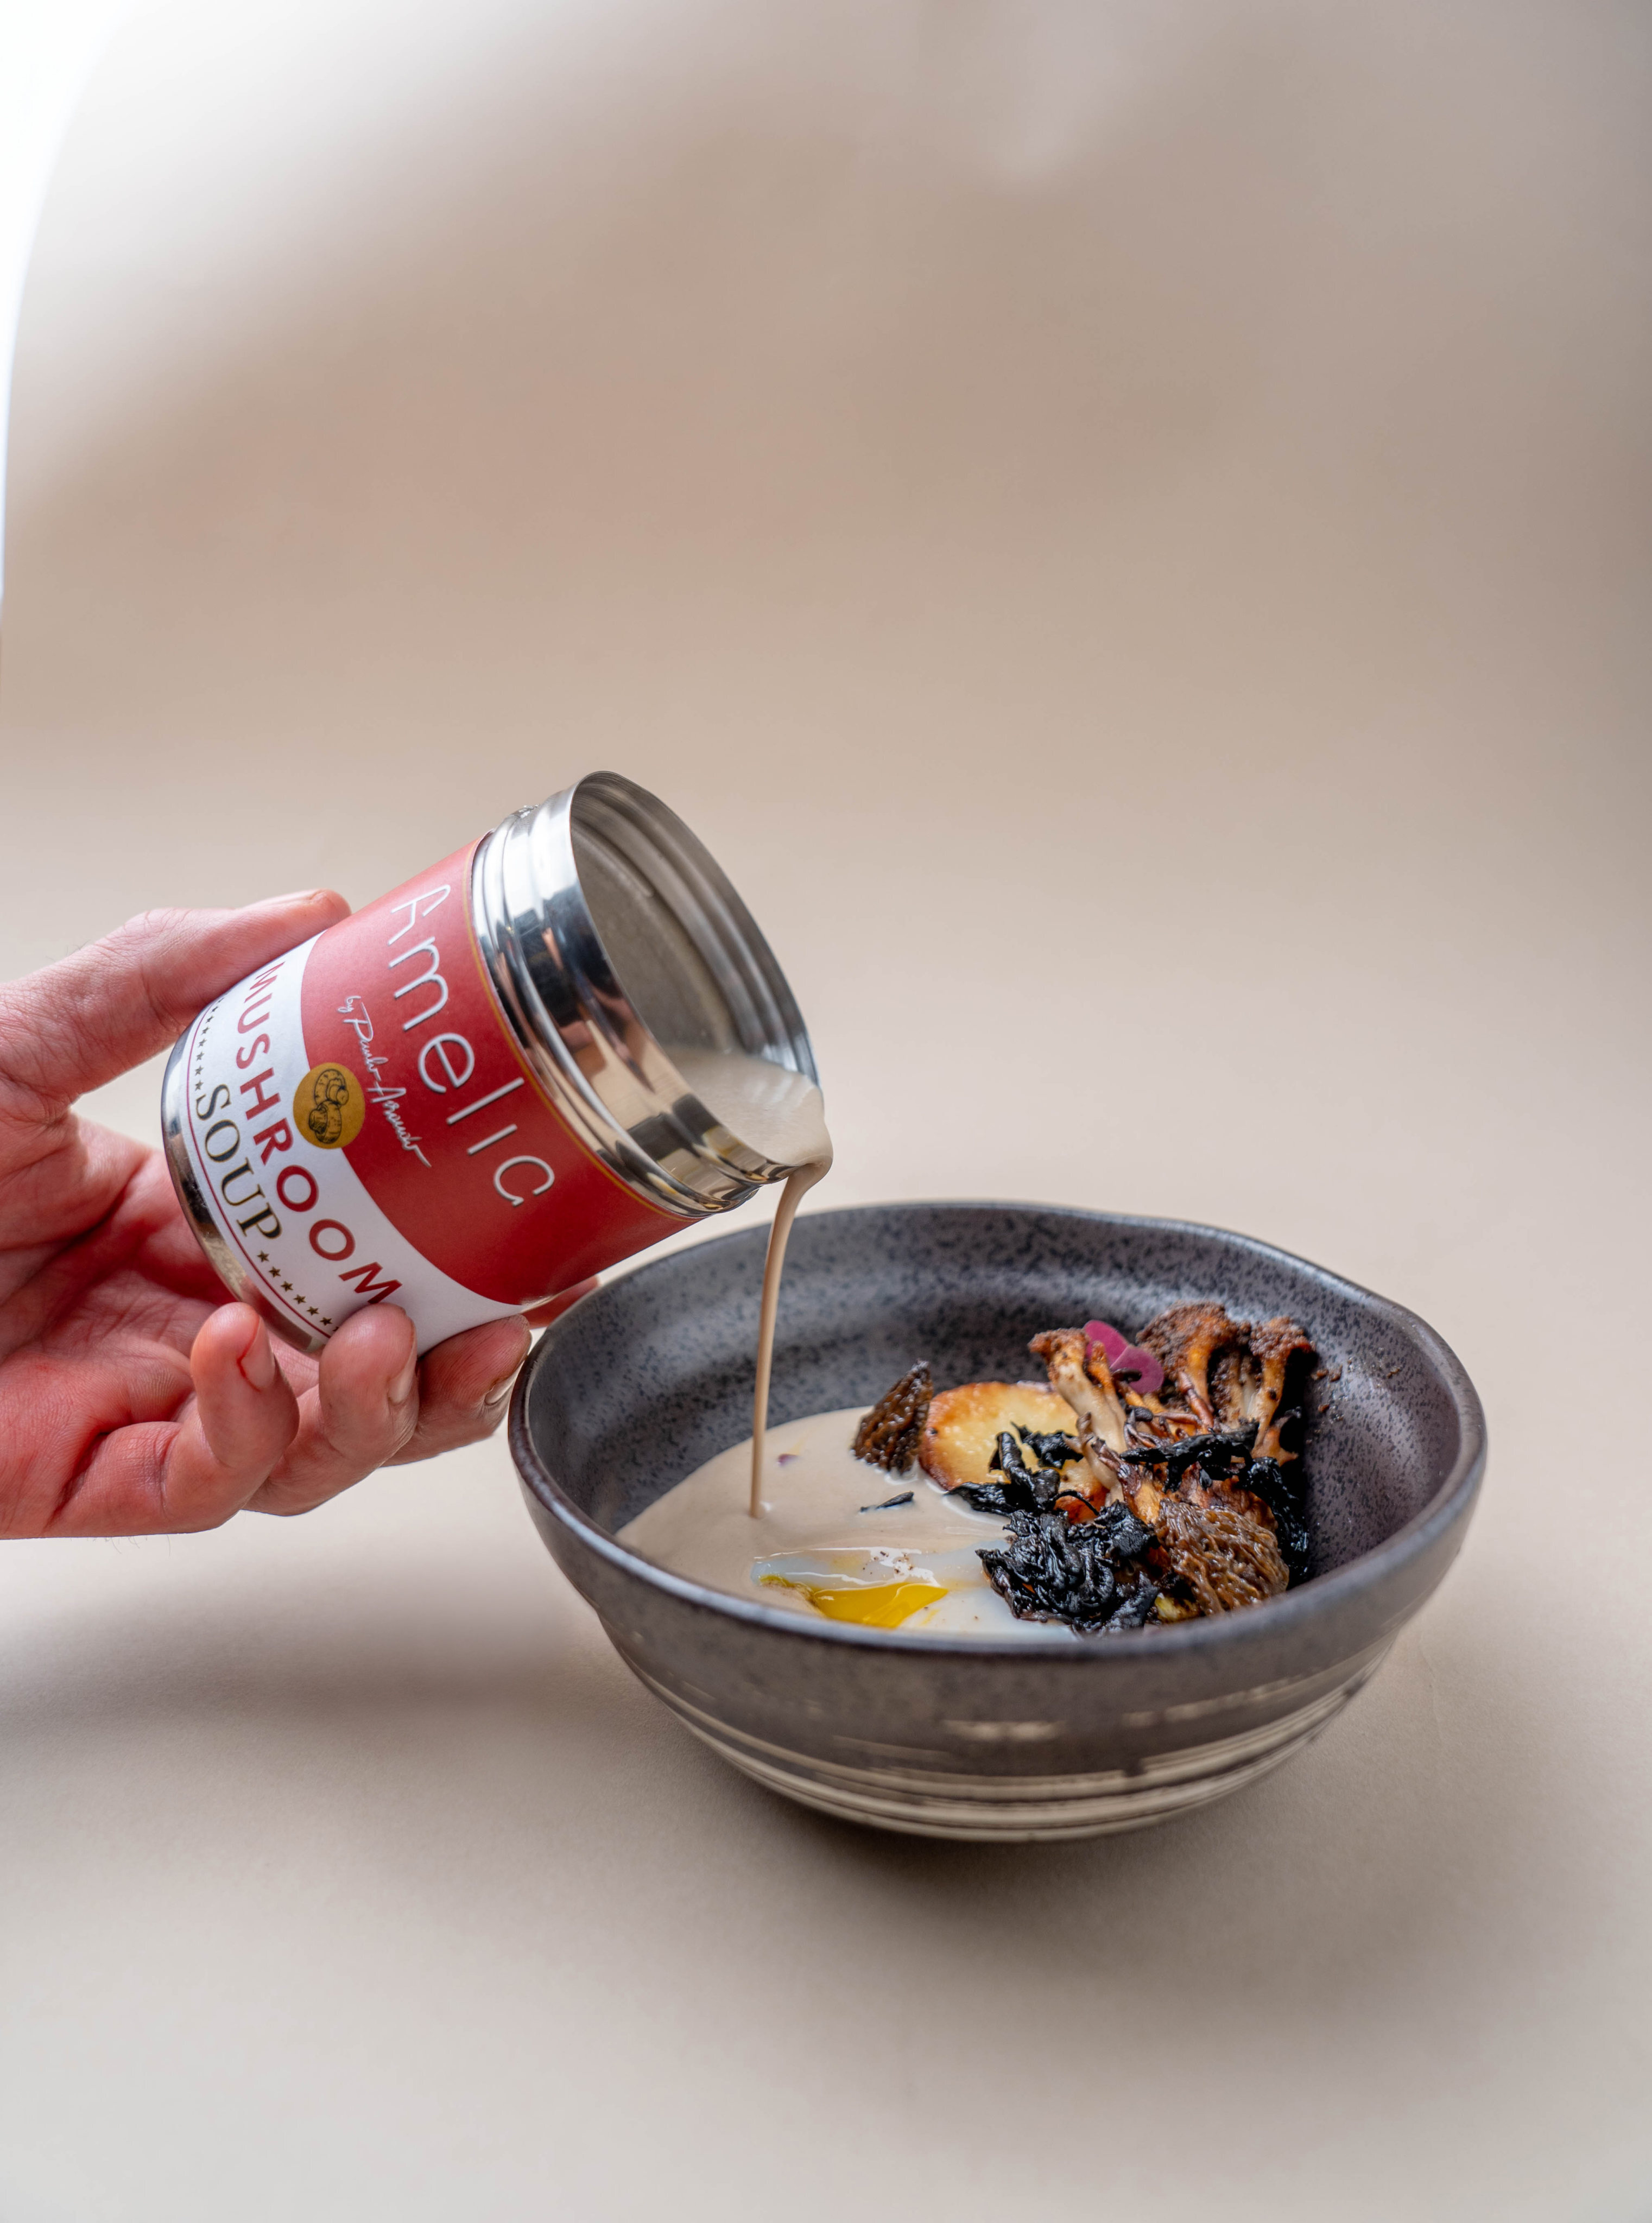 Inspired by Andy Warhol’s famous artwork Campbell’s Soup Cans, Amelia Hong Kong is offering a dish called Campbell Soup. The soup is poured table-side from a Campbell’s-style can. Photo: Amelia